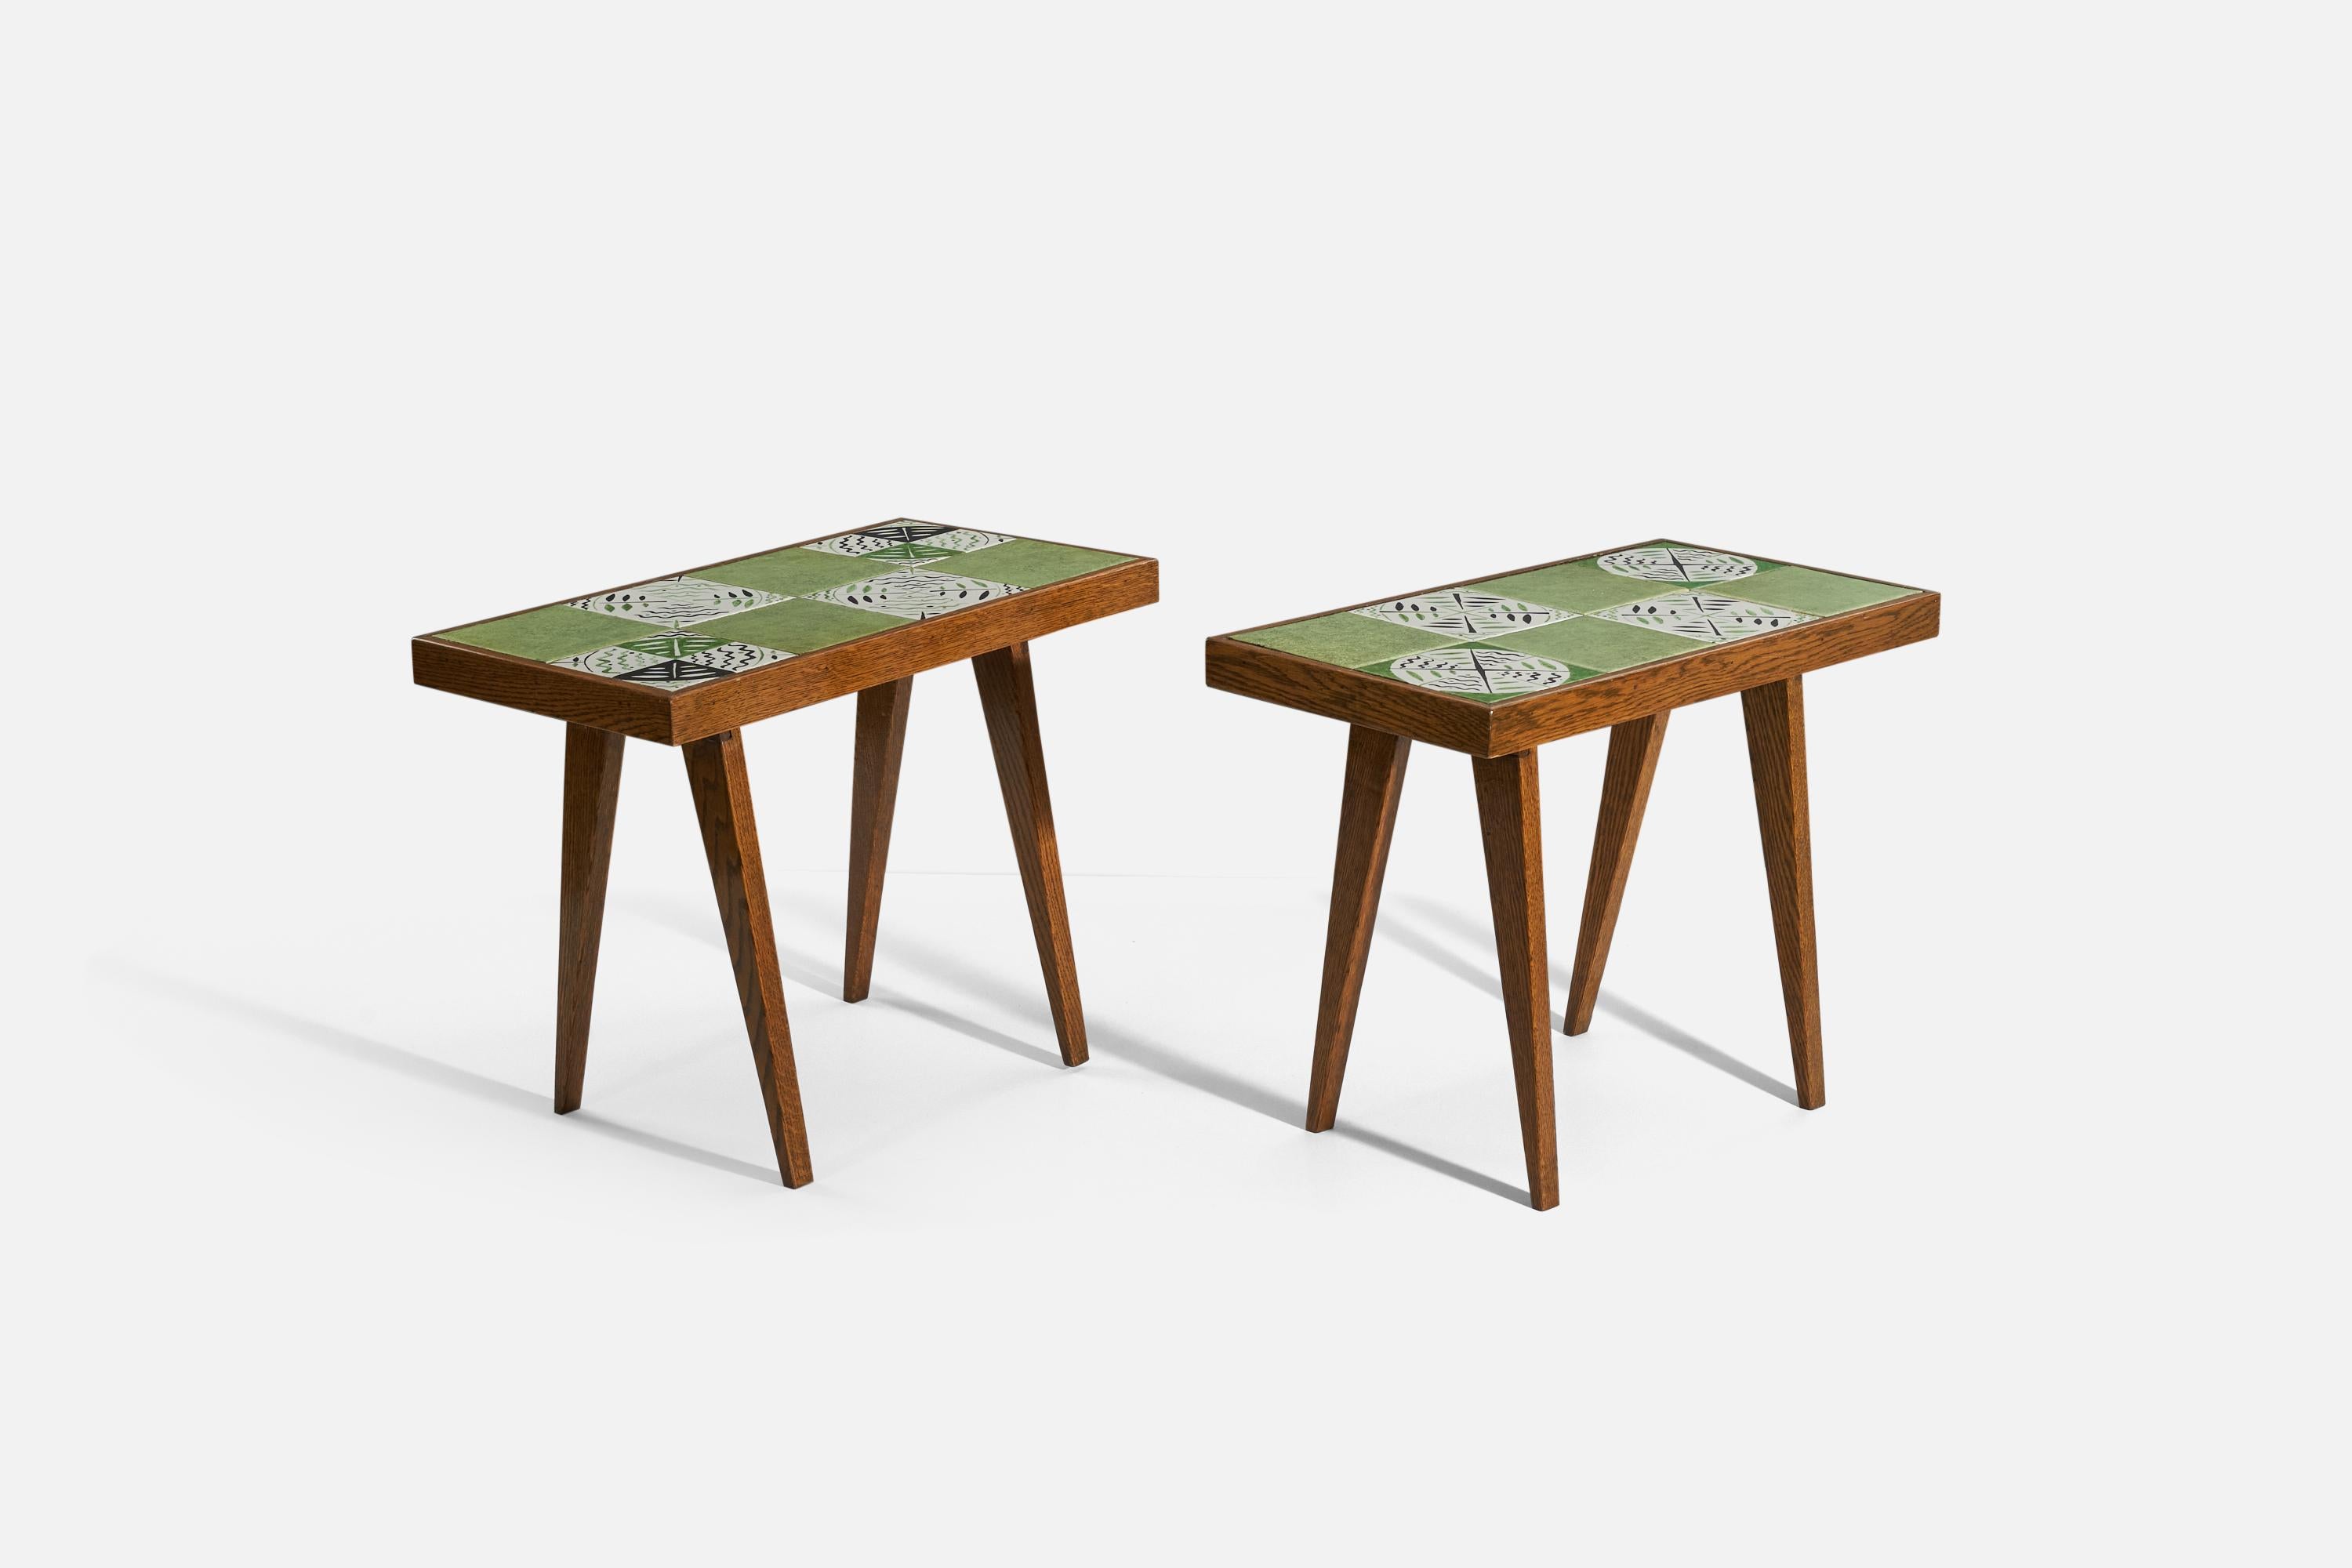 A pair of walnut, and green and white ceramic side tables, designed by an American designer, United States, c. 1950s.
 